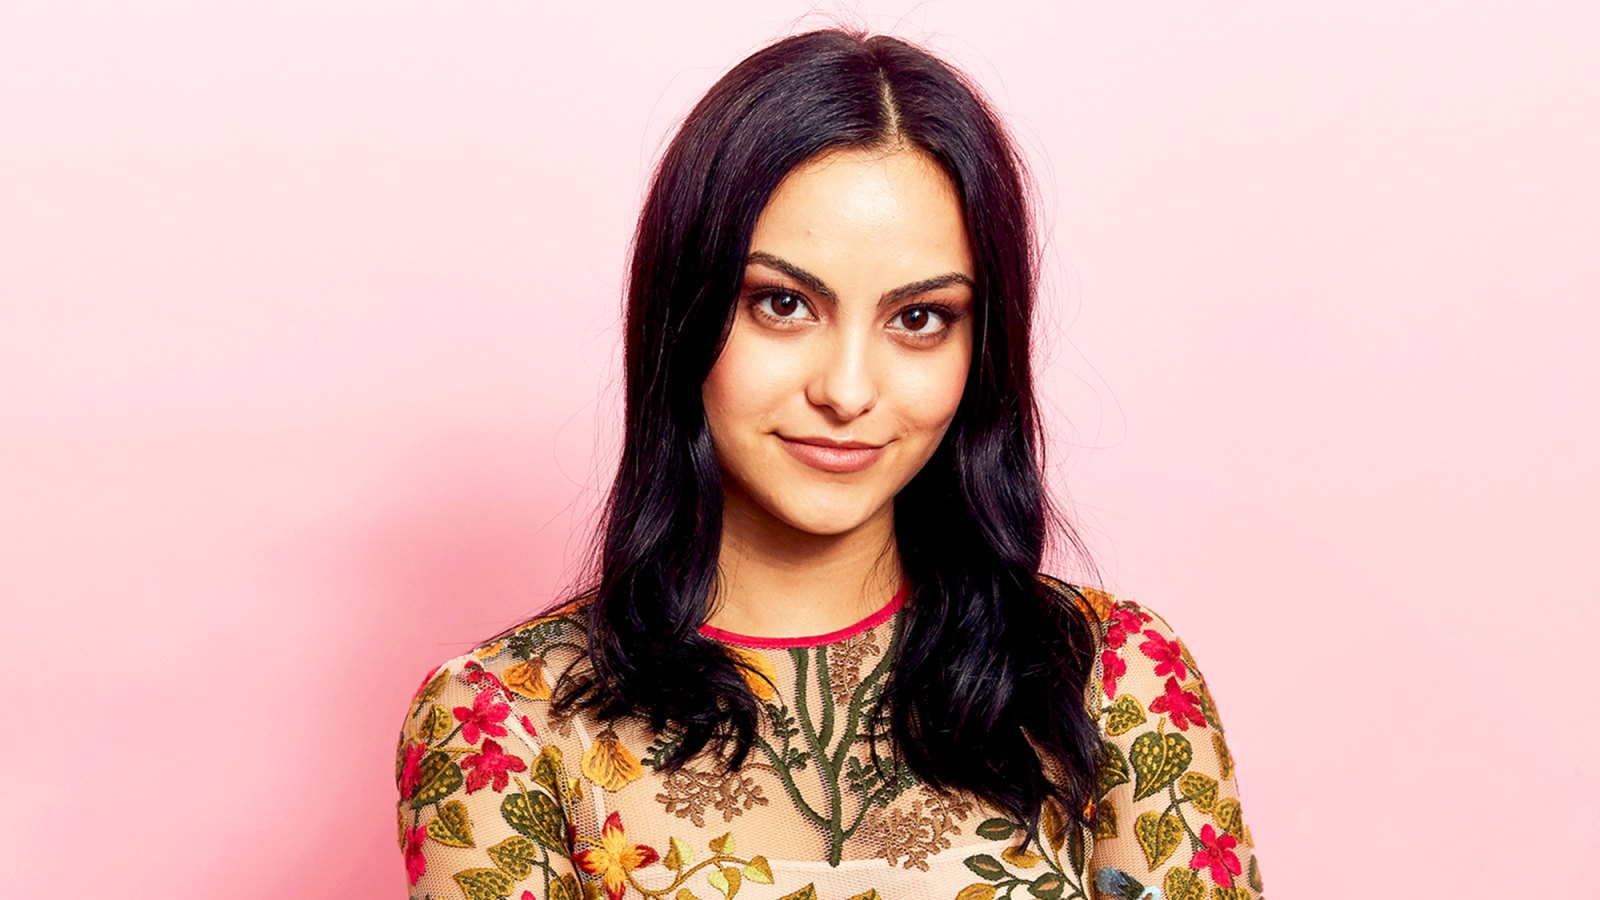 Camila Mendes from CW's 'Riverdale' poses for a portrait during Comic-Con 2017 at Hard Rock Hotel in San Diego, California.